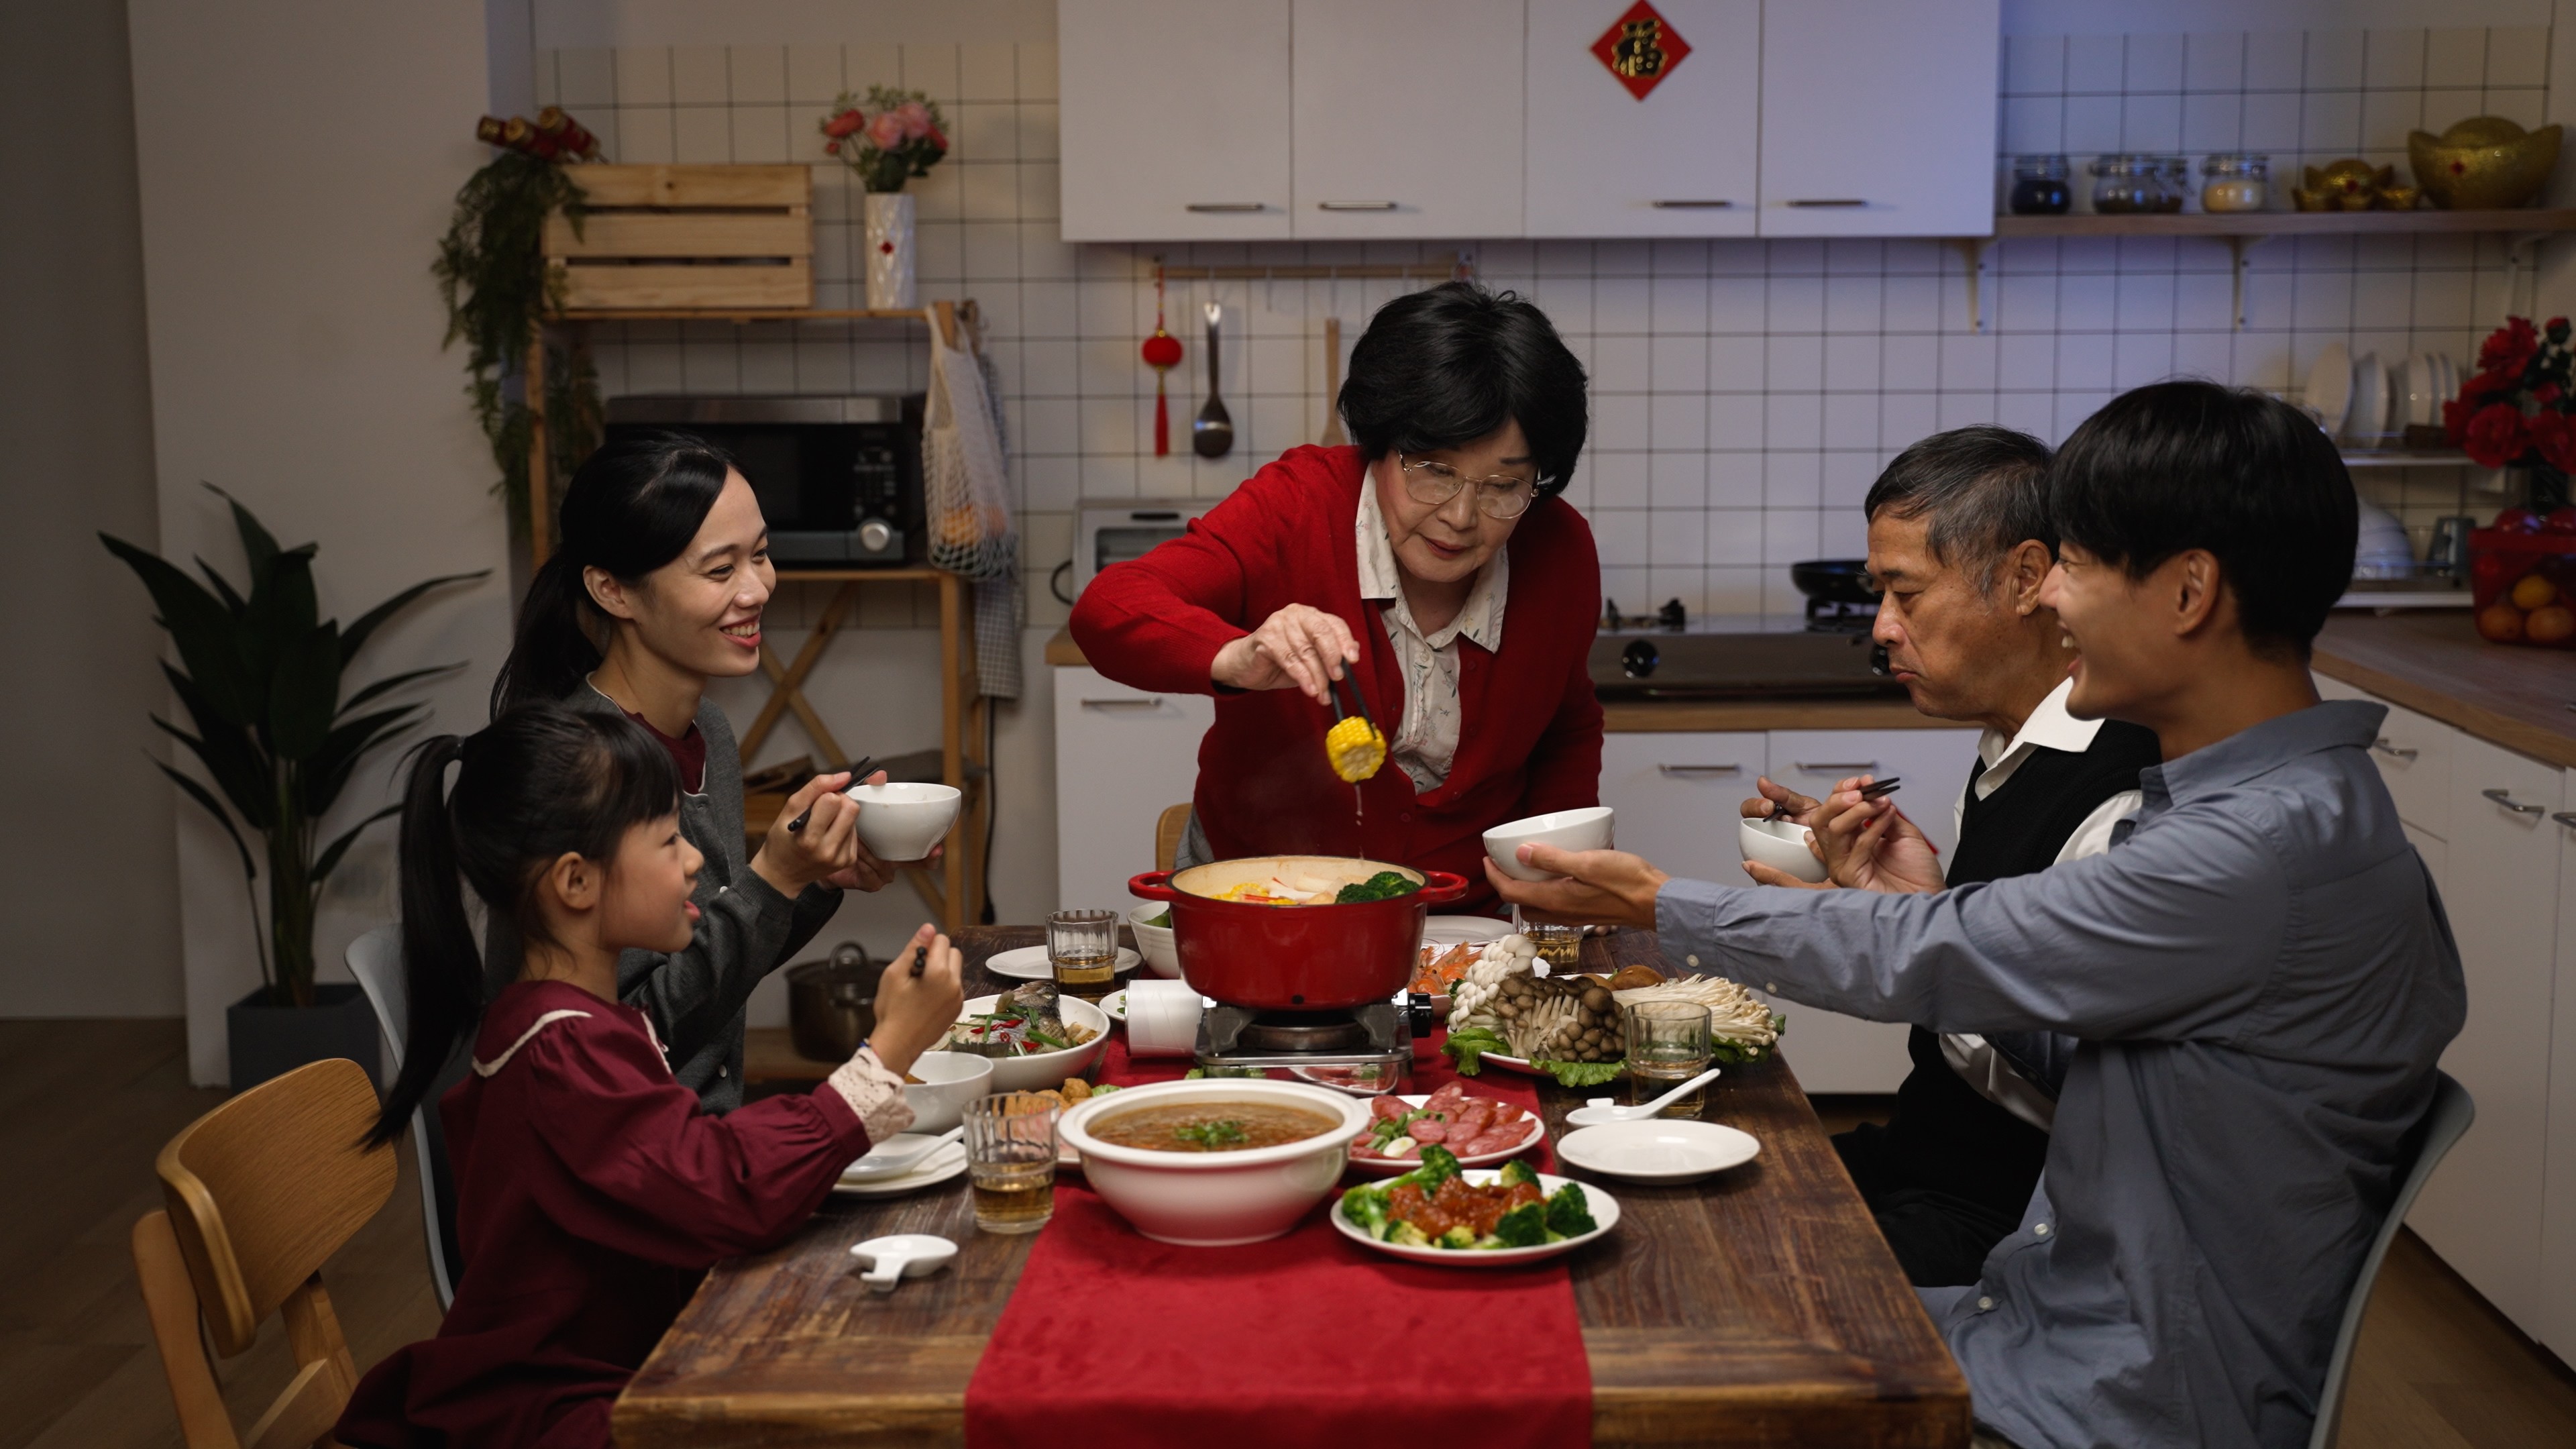 Older relatives often still use their own chopsticks to offer food from shared plates to other family members rather than using communal ones, even after two global pandemics in two decades. Photo: Shutterstock